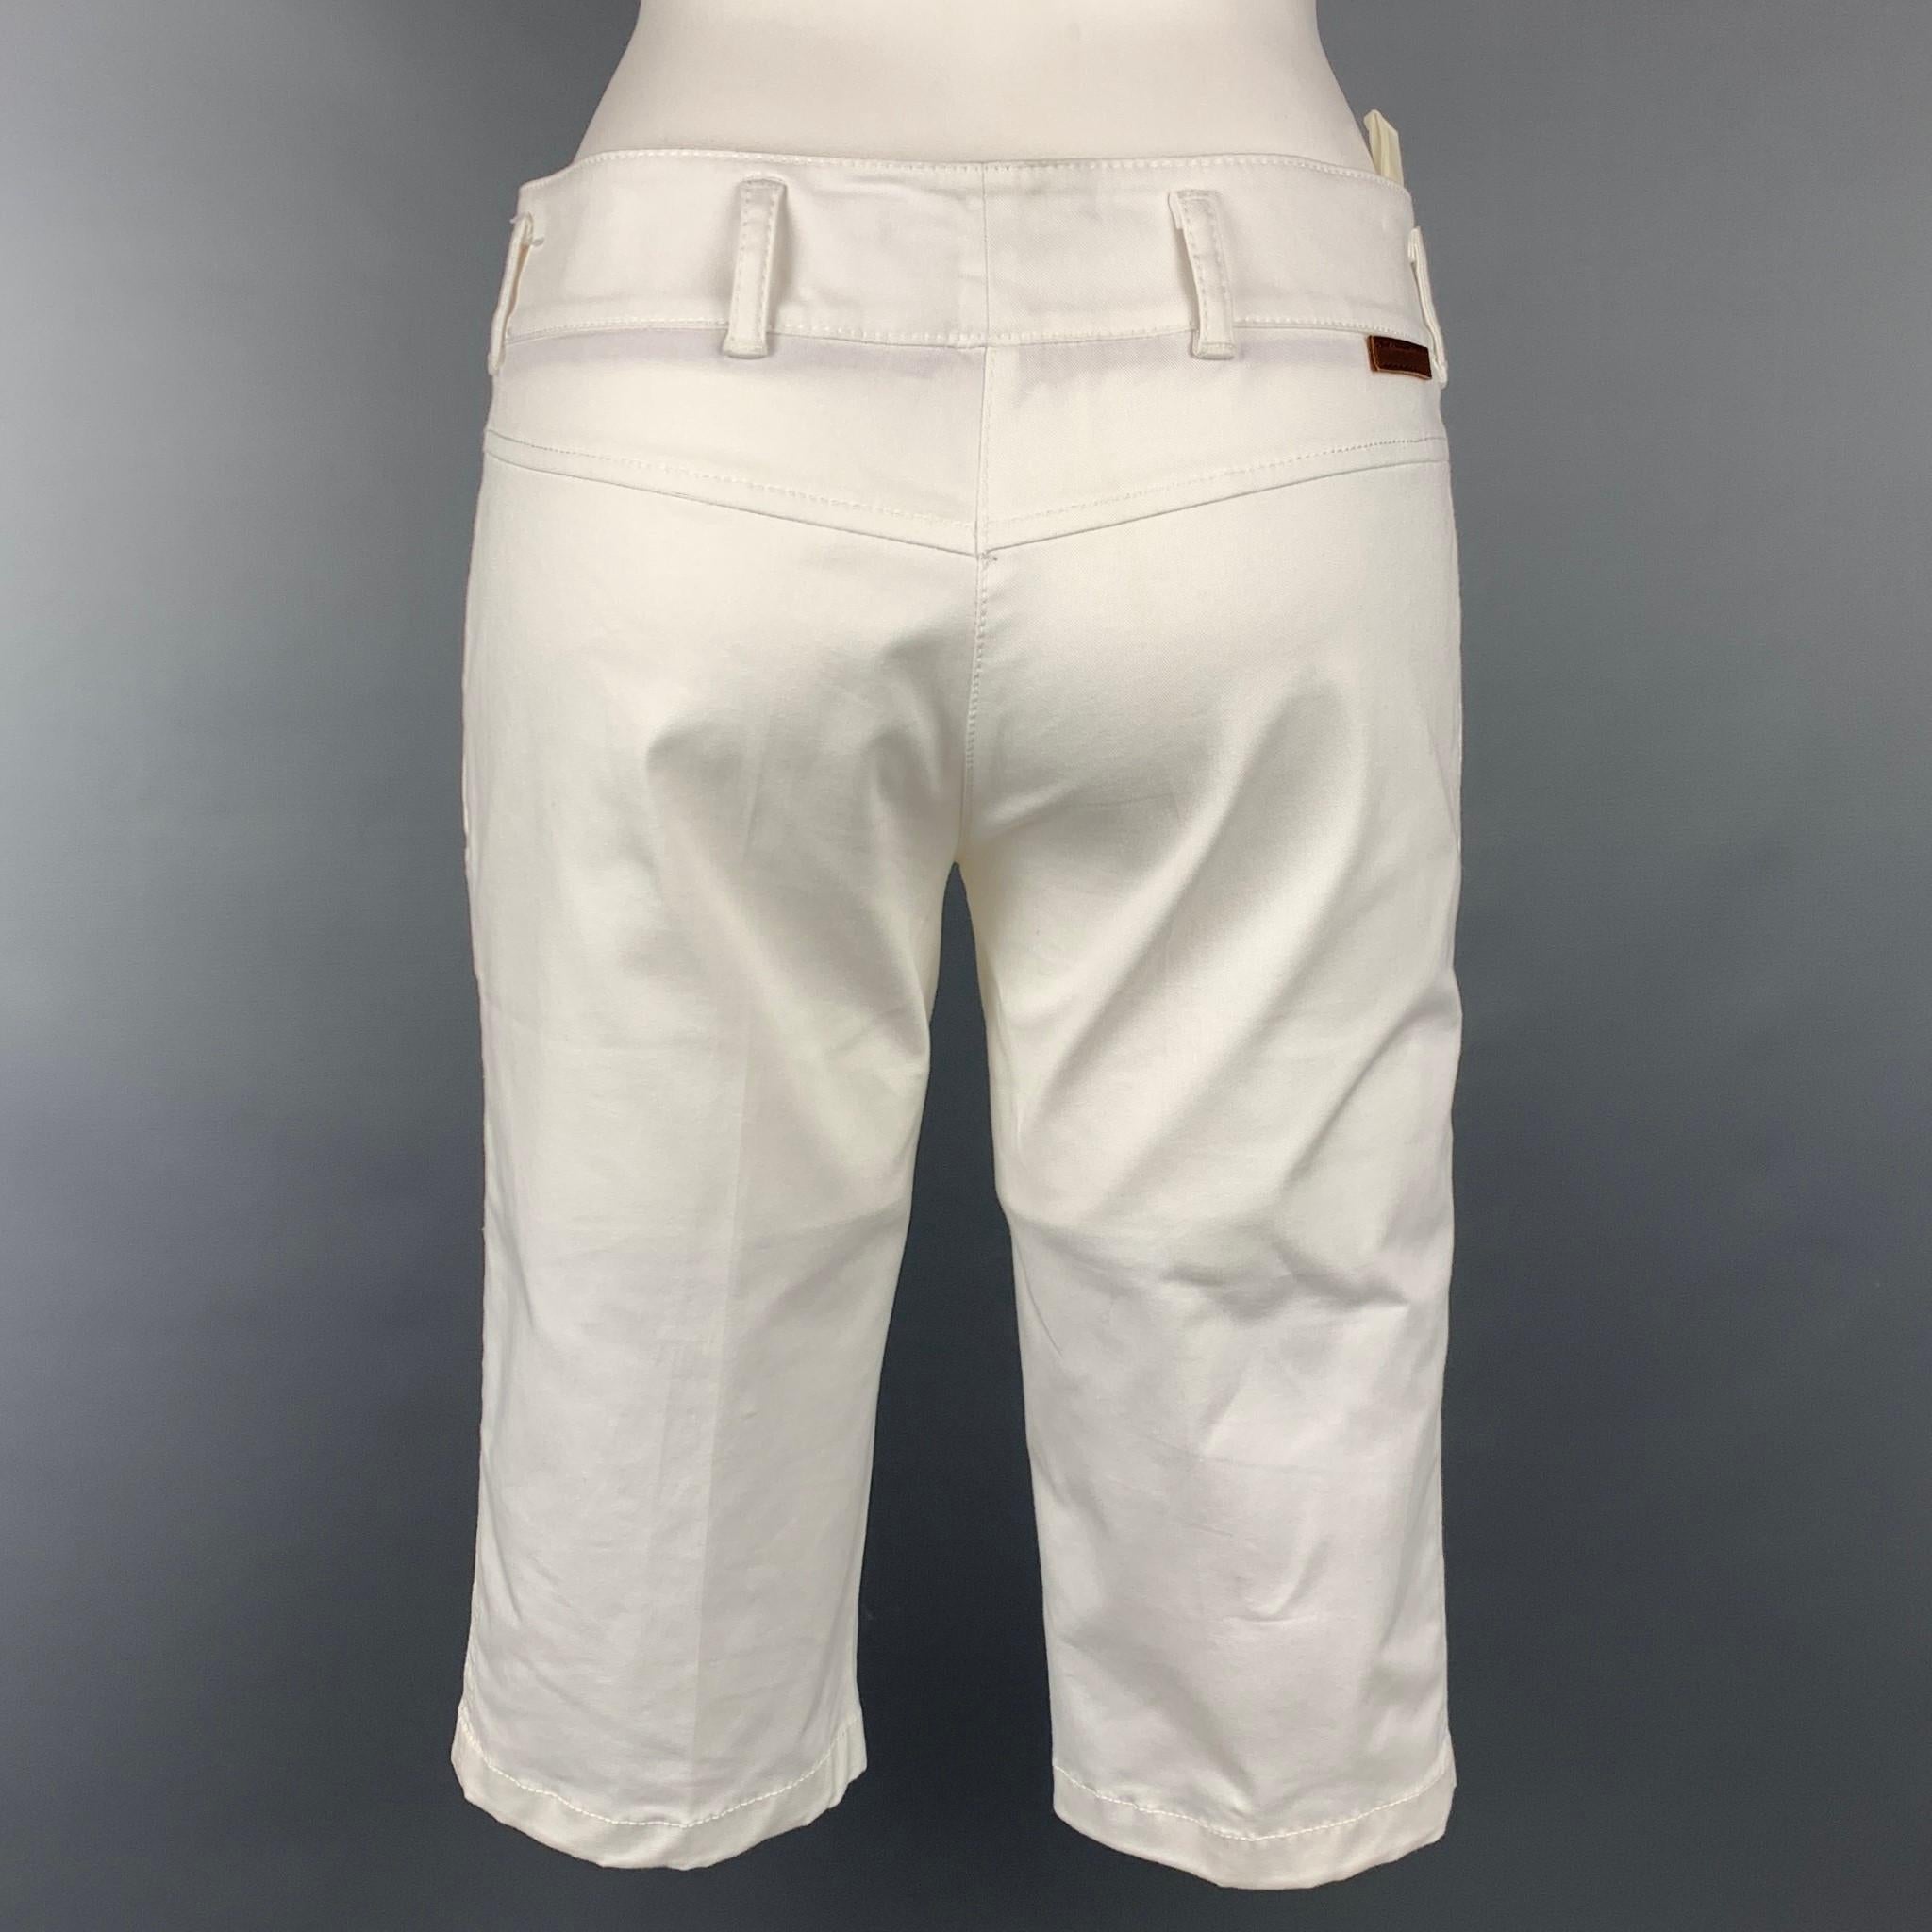 PRADA shorts comes in a white cotton blend featuring a bermuda style, zip fly, and a front tab closure. 

Very Good Pre-Owned Condition.
Marked: 38

Measurements:

Waist: 30 in.
Rise: 8 in.
Inseam: 14 in. 